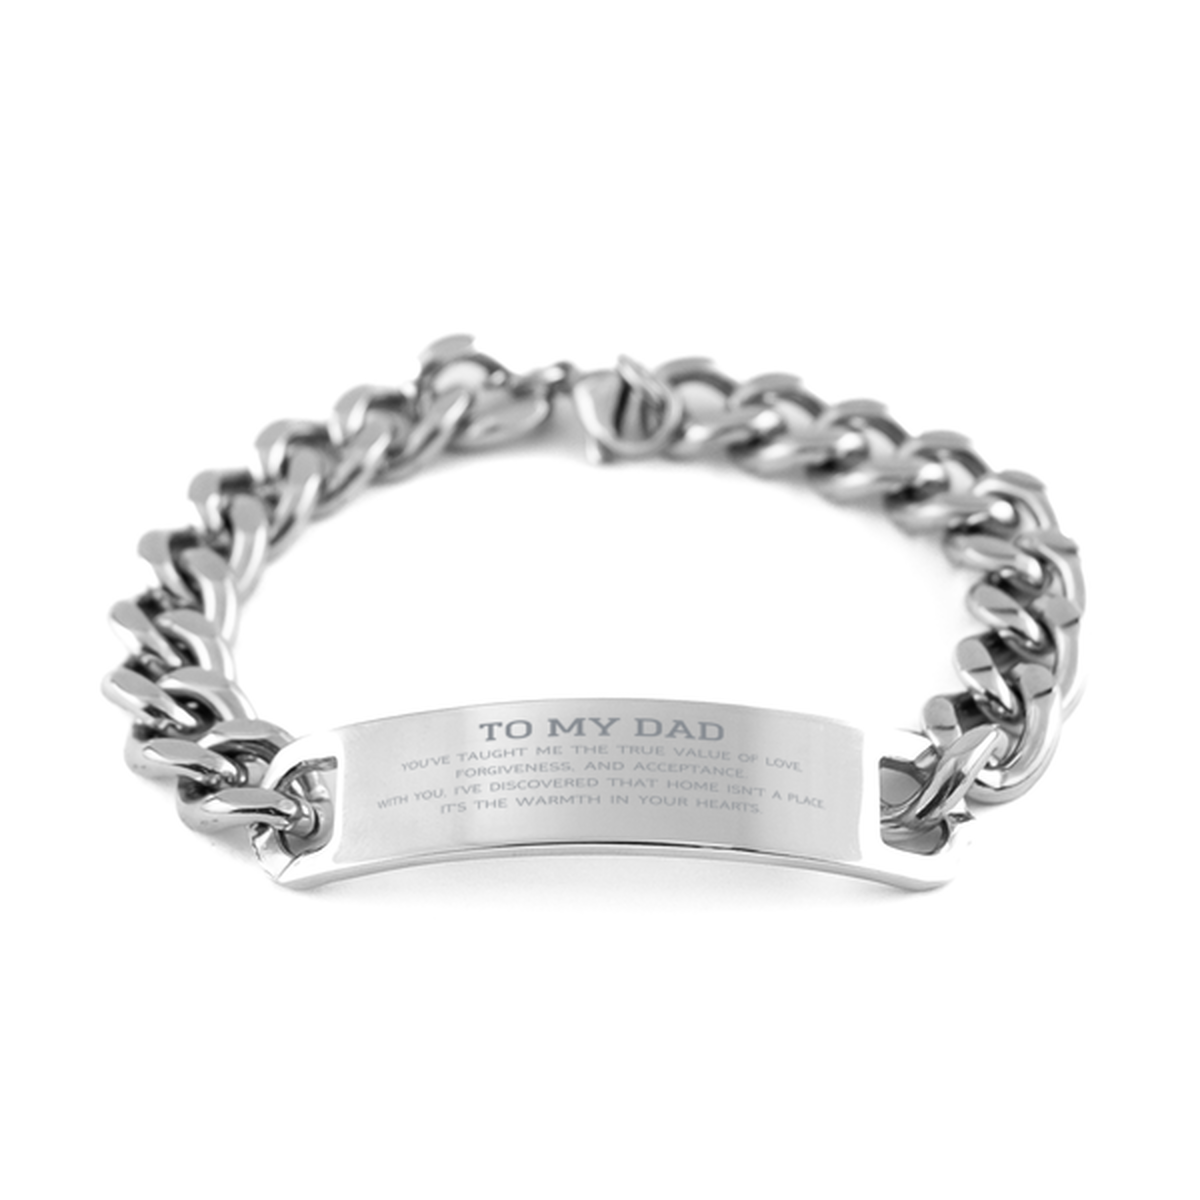 To My Dad Gifts, You've taught me the true value of love, Thank You Gifts For Dad, Birthday Cuban Chain Stainless Steel Bracelet For Dad